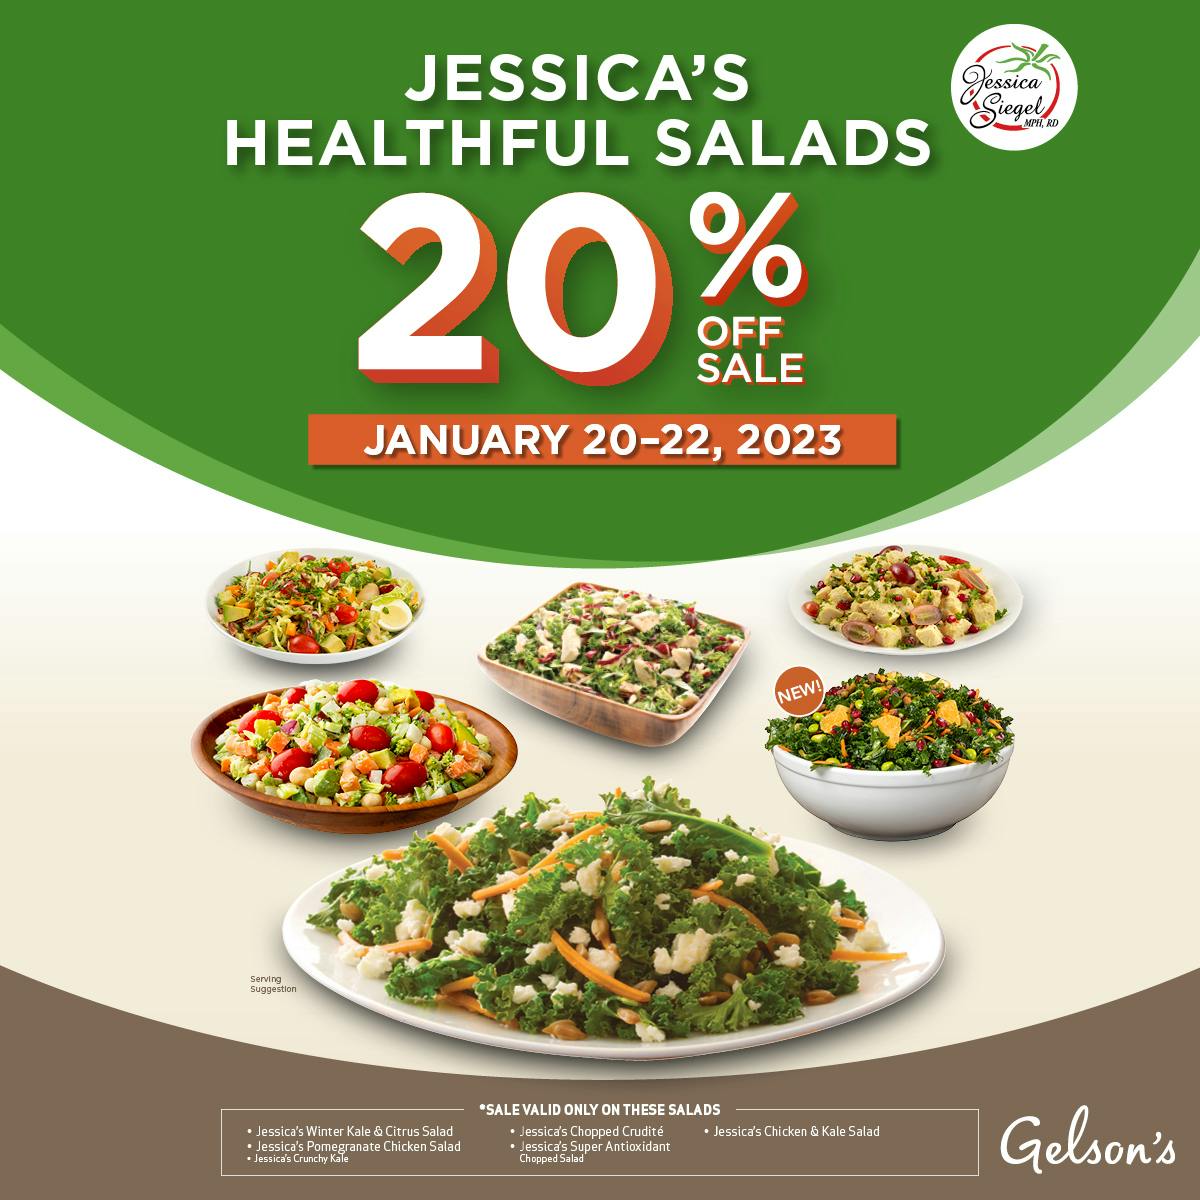 Mark your calendars for 20% off Jessica's healthful salads between January 20-22, 2023! The sale is valid only on these salads: Jessica's Winter Kale & Citrus Salad, Pomegranate Chicken Salad, Crunchy Kale, Lucky Life Salad, Super Antioxidant Chopped Salad, Chicken and Kale Salad, and Chopped Crudité. Sale price will be taken at check out.